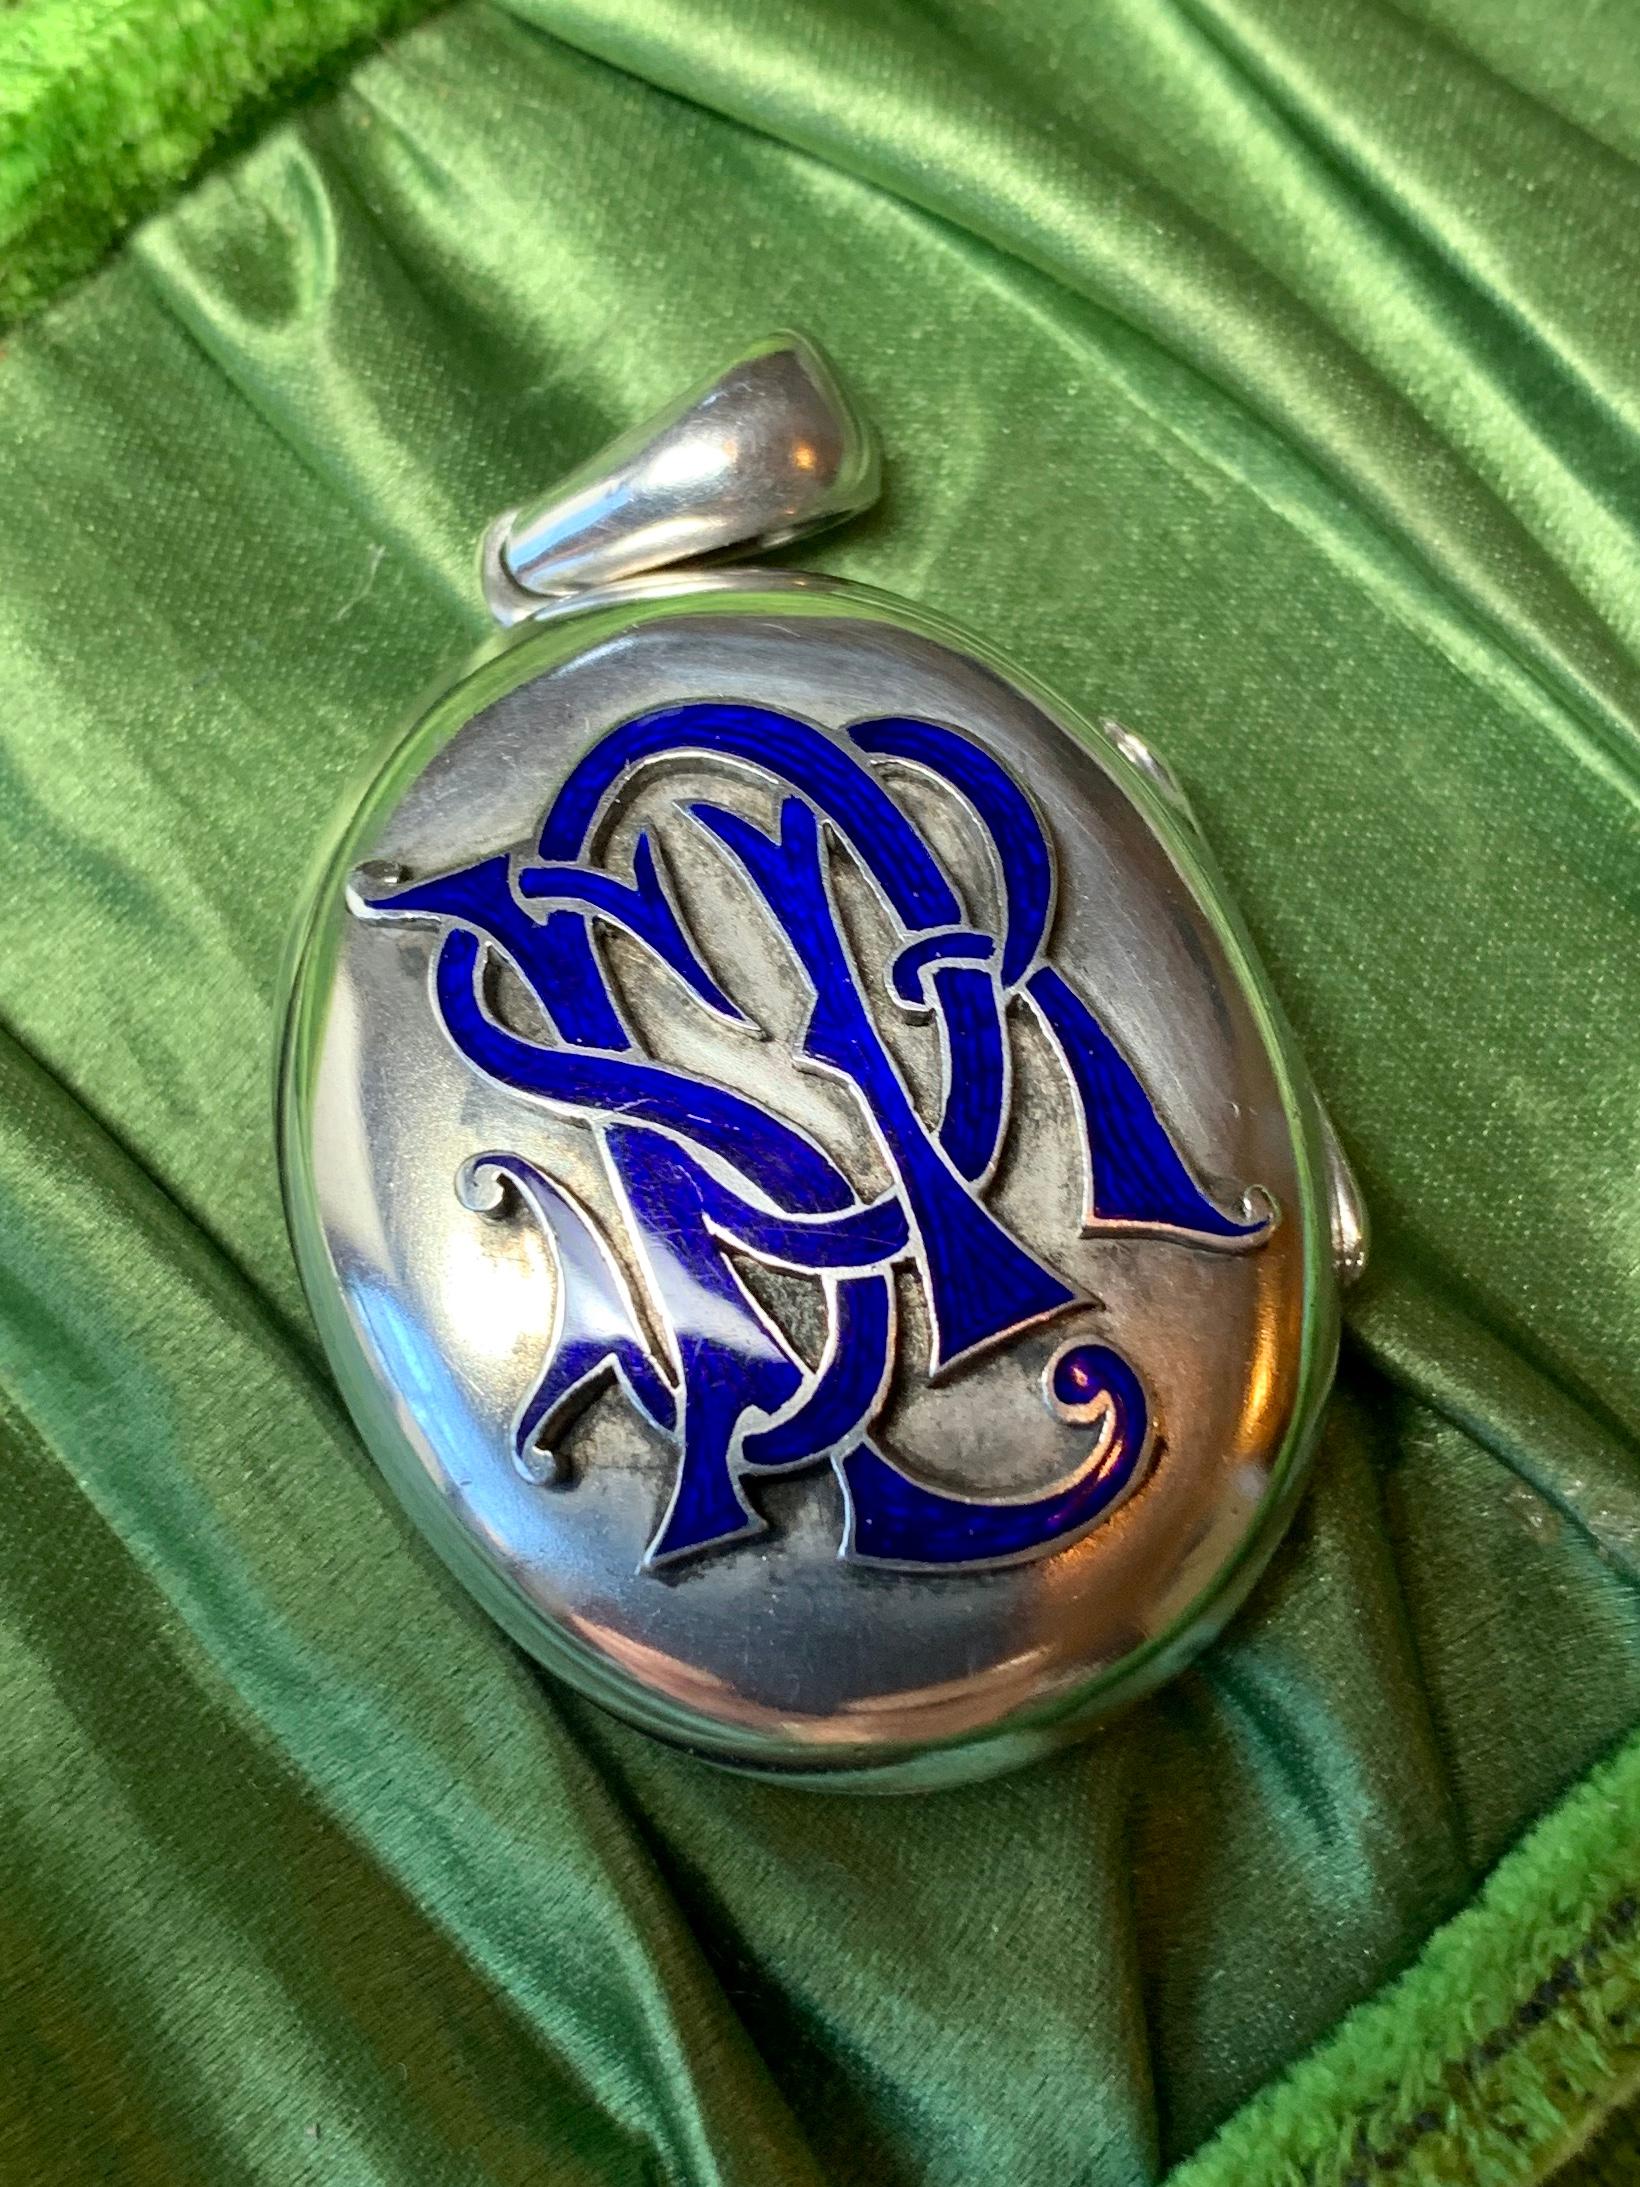 A wonderful Art Deco - Victorian Locket Pendant in Silver with a gorgeous royal blue enamel monogram.  The monogram in ornately raised letters of great beauty with fine royal blue enamel decoration.  Inside, the locket opens to reveal compartments